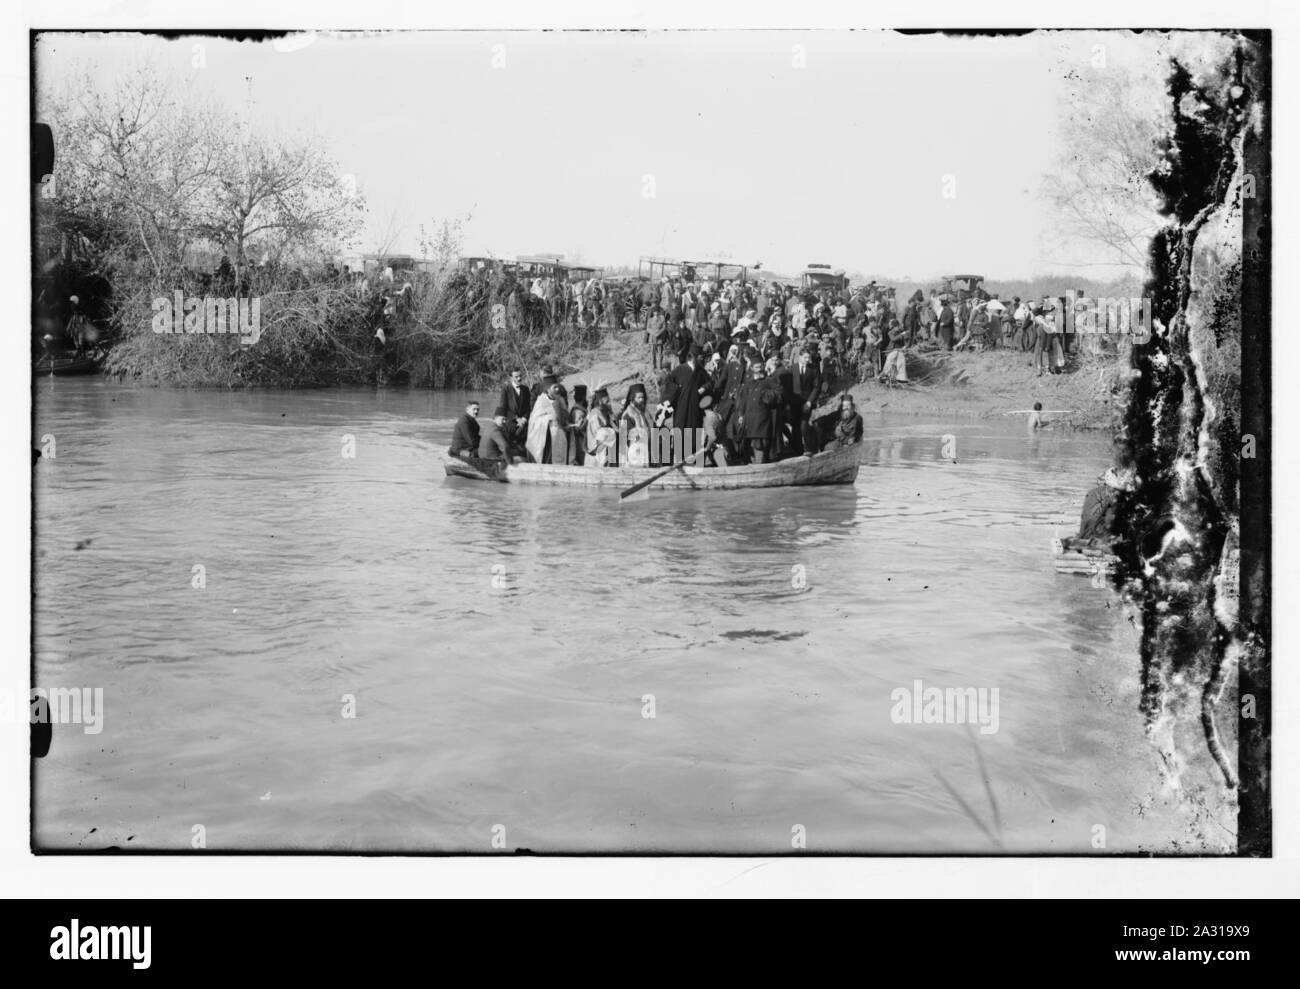 Epiphany ceremony. Jordan River. Sanctifying the waters of the Jordan on Ephphany Stock Photo